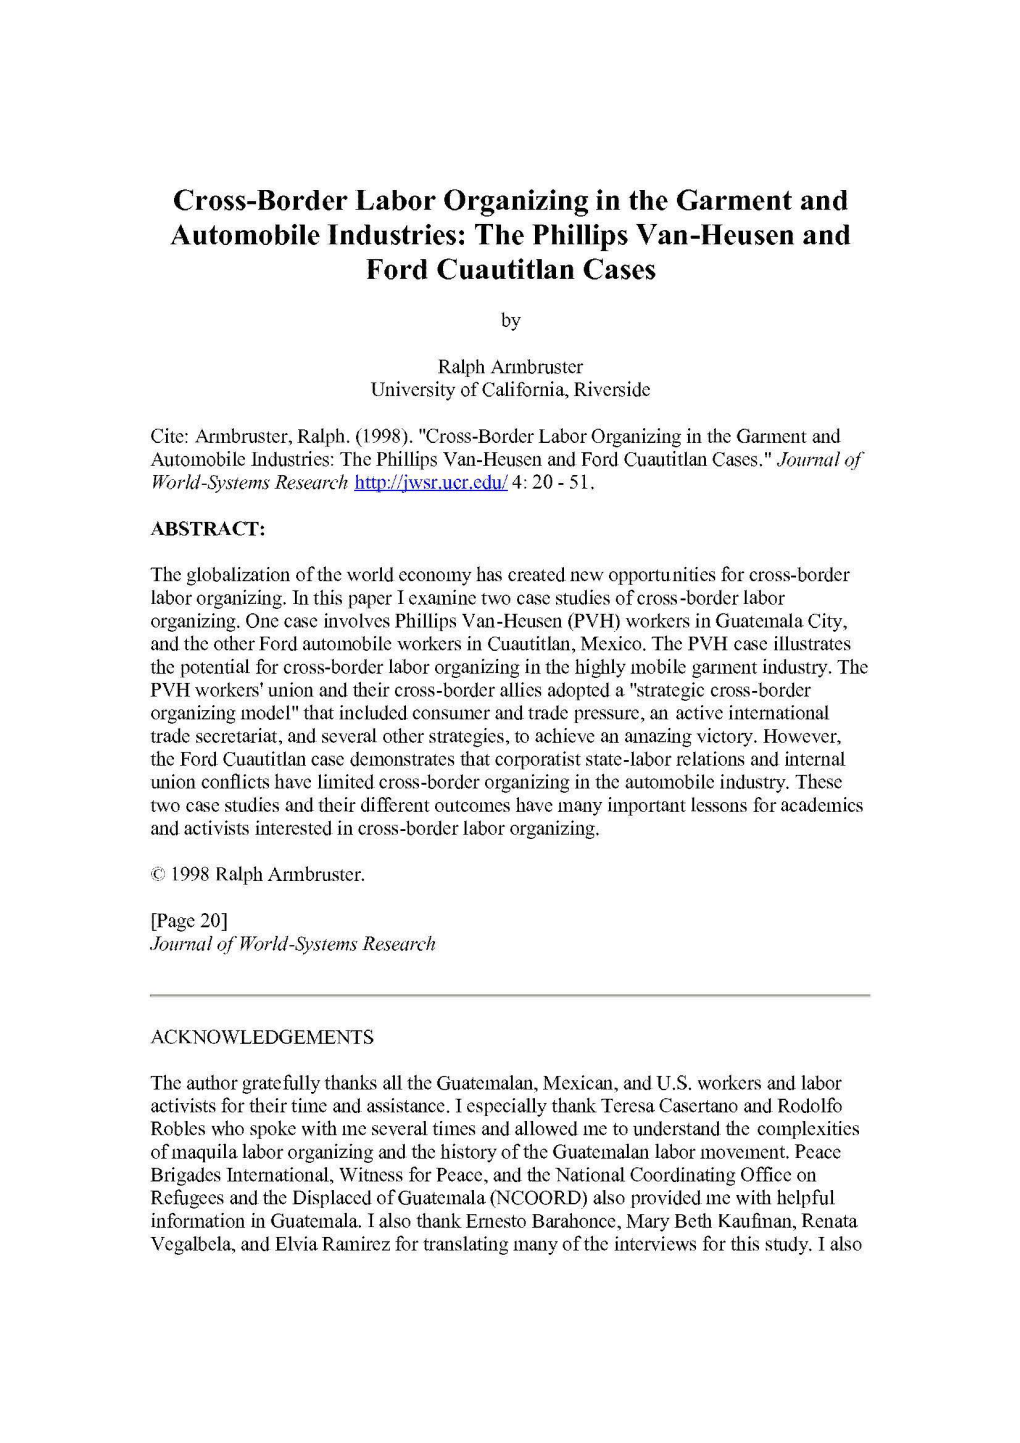 Cross-Border Labor Organizing in the Garment and Automobile Industries: the Phillips Van-Heusen and Ford Cuautitlan Cases